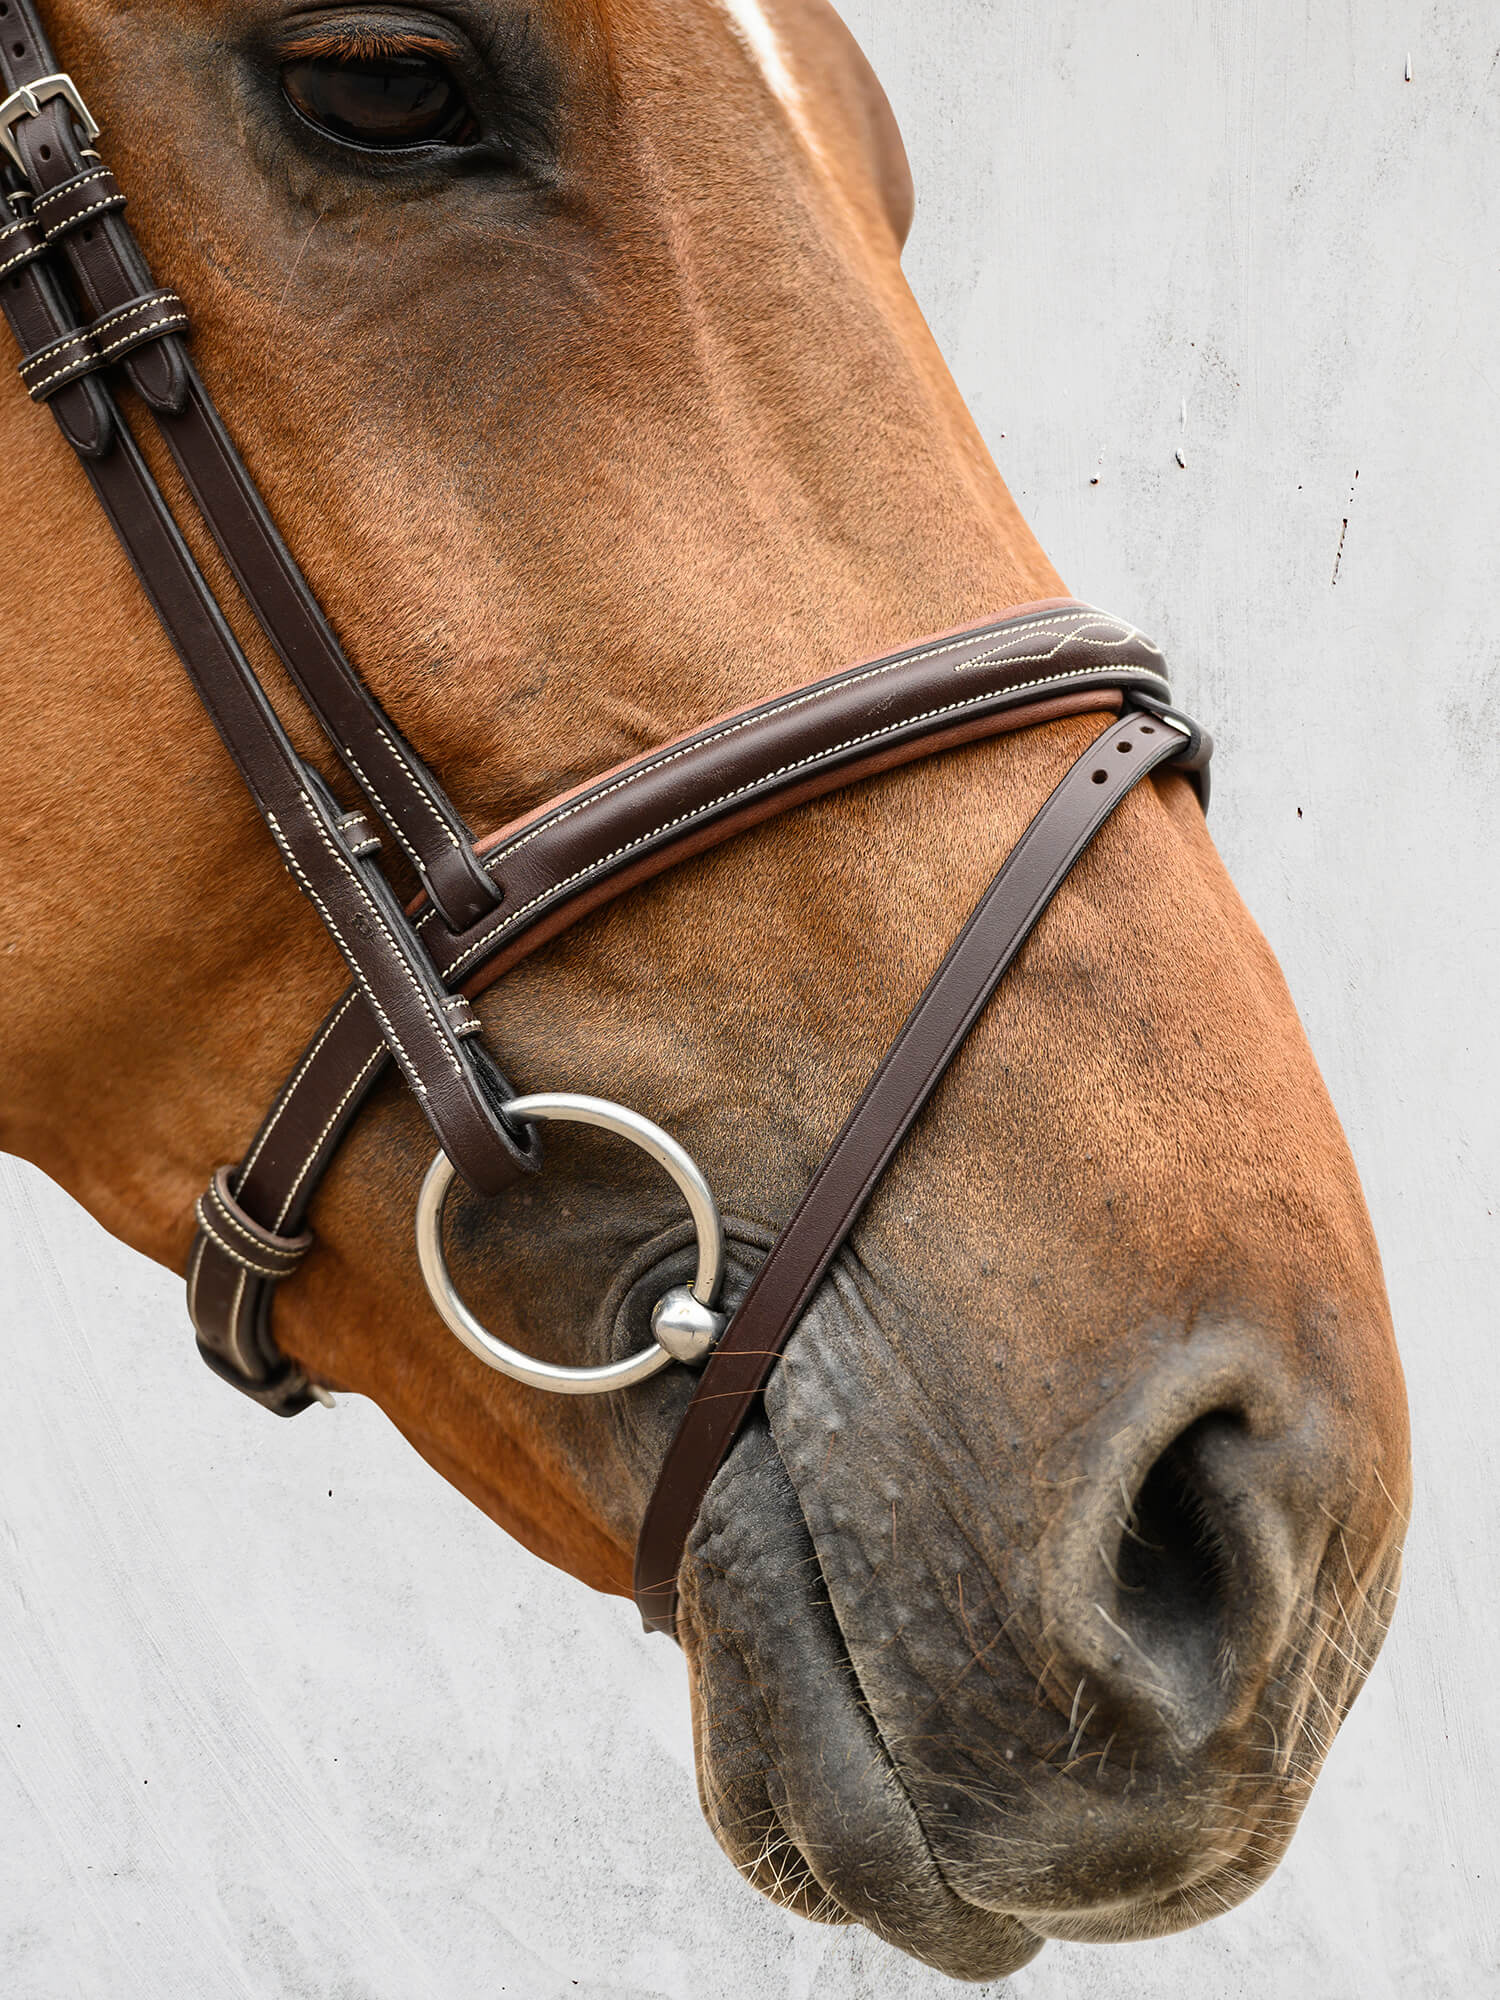 A stylish snaffle bridle with a classical look and removable flash strap (Not Magic Flash™). The noseband has a white décor stitching and a super soft pillow built-in that reduces pressure and enables a closer, optimized fit around the nose. 